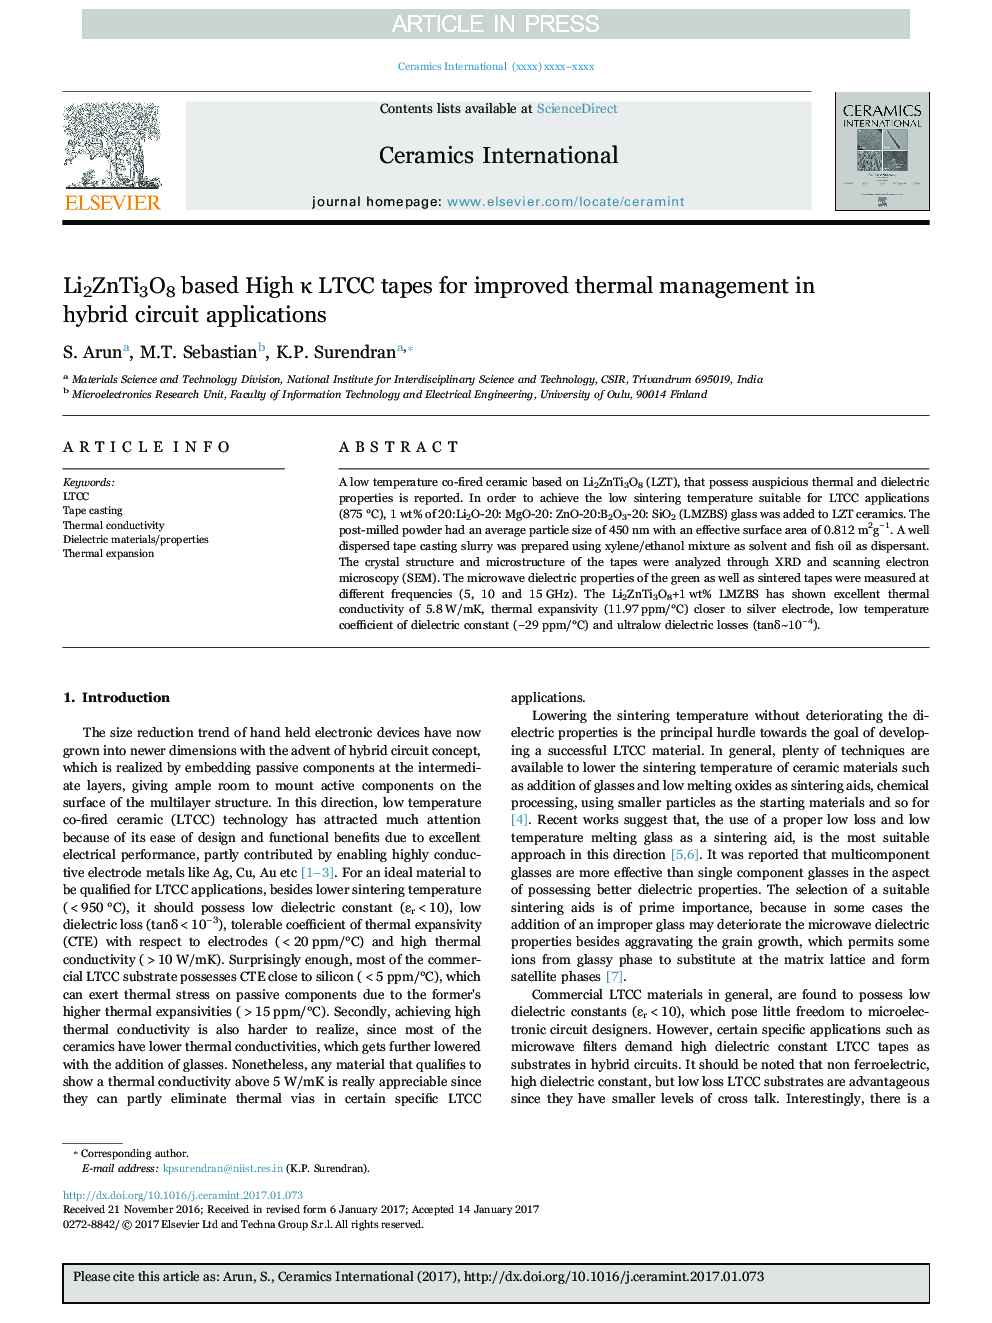 Li2ZnTi3O8 based High Îº LTCC tapes for improved thermal management in hybrid circuit applications